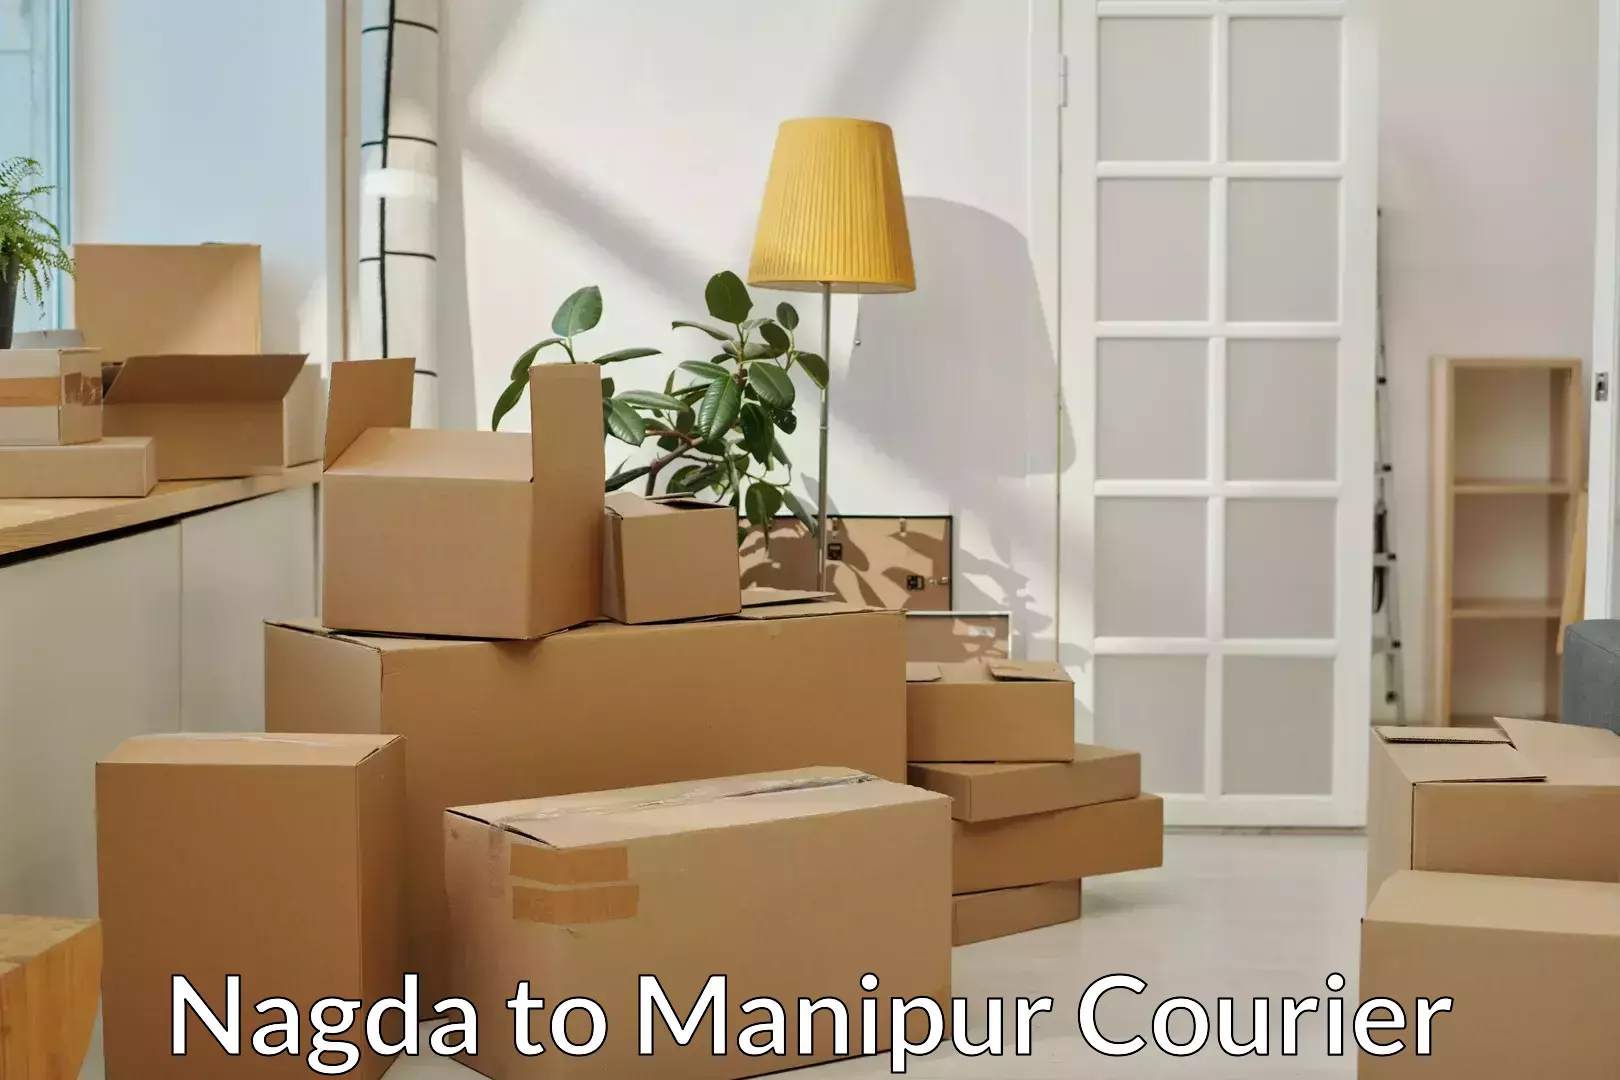 Trusted relocation experts Nagda to Manipur